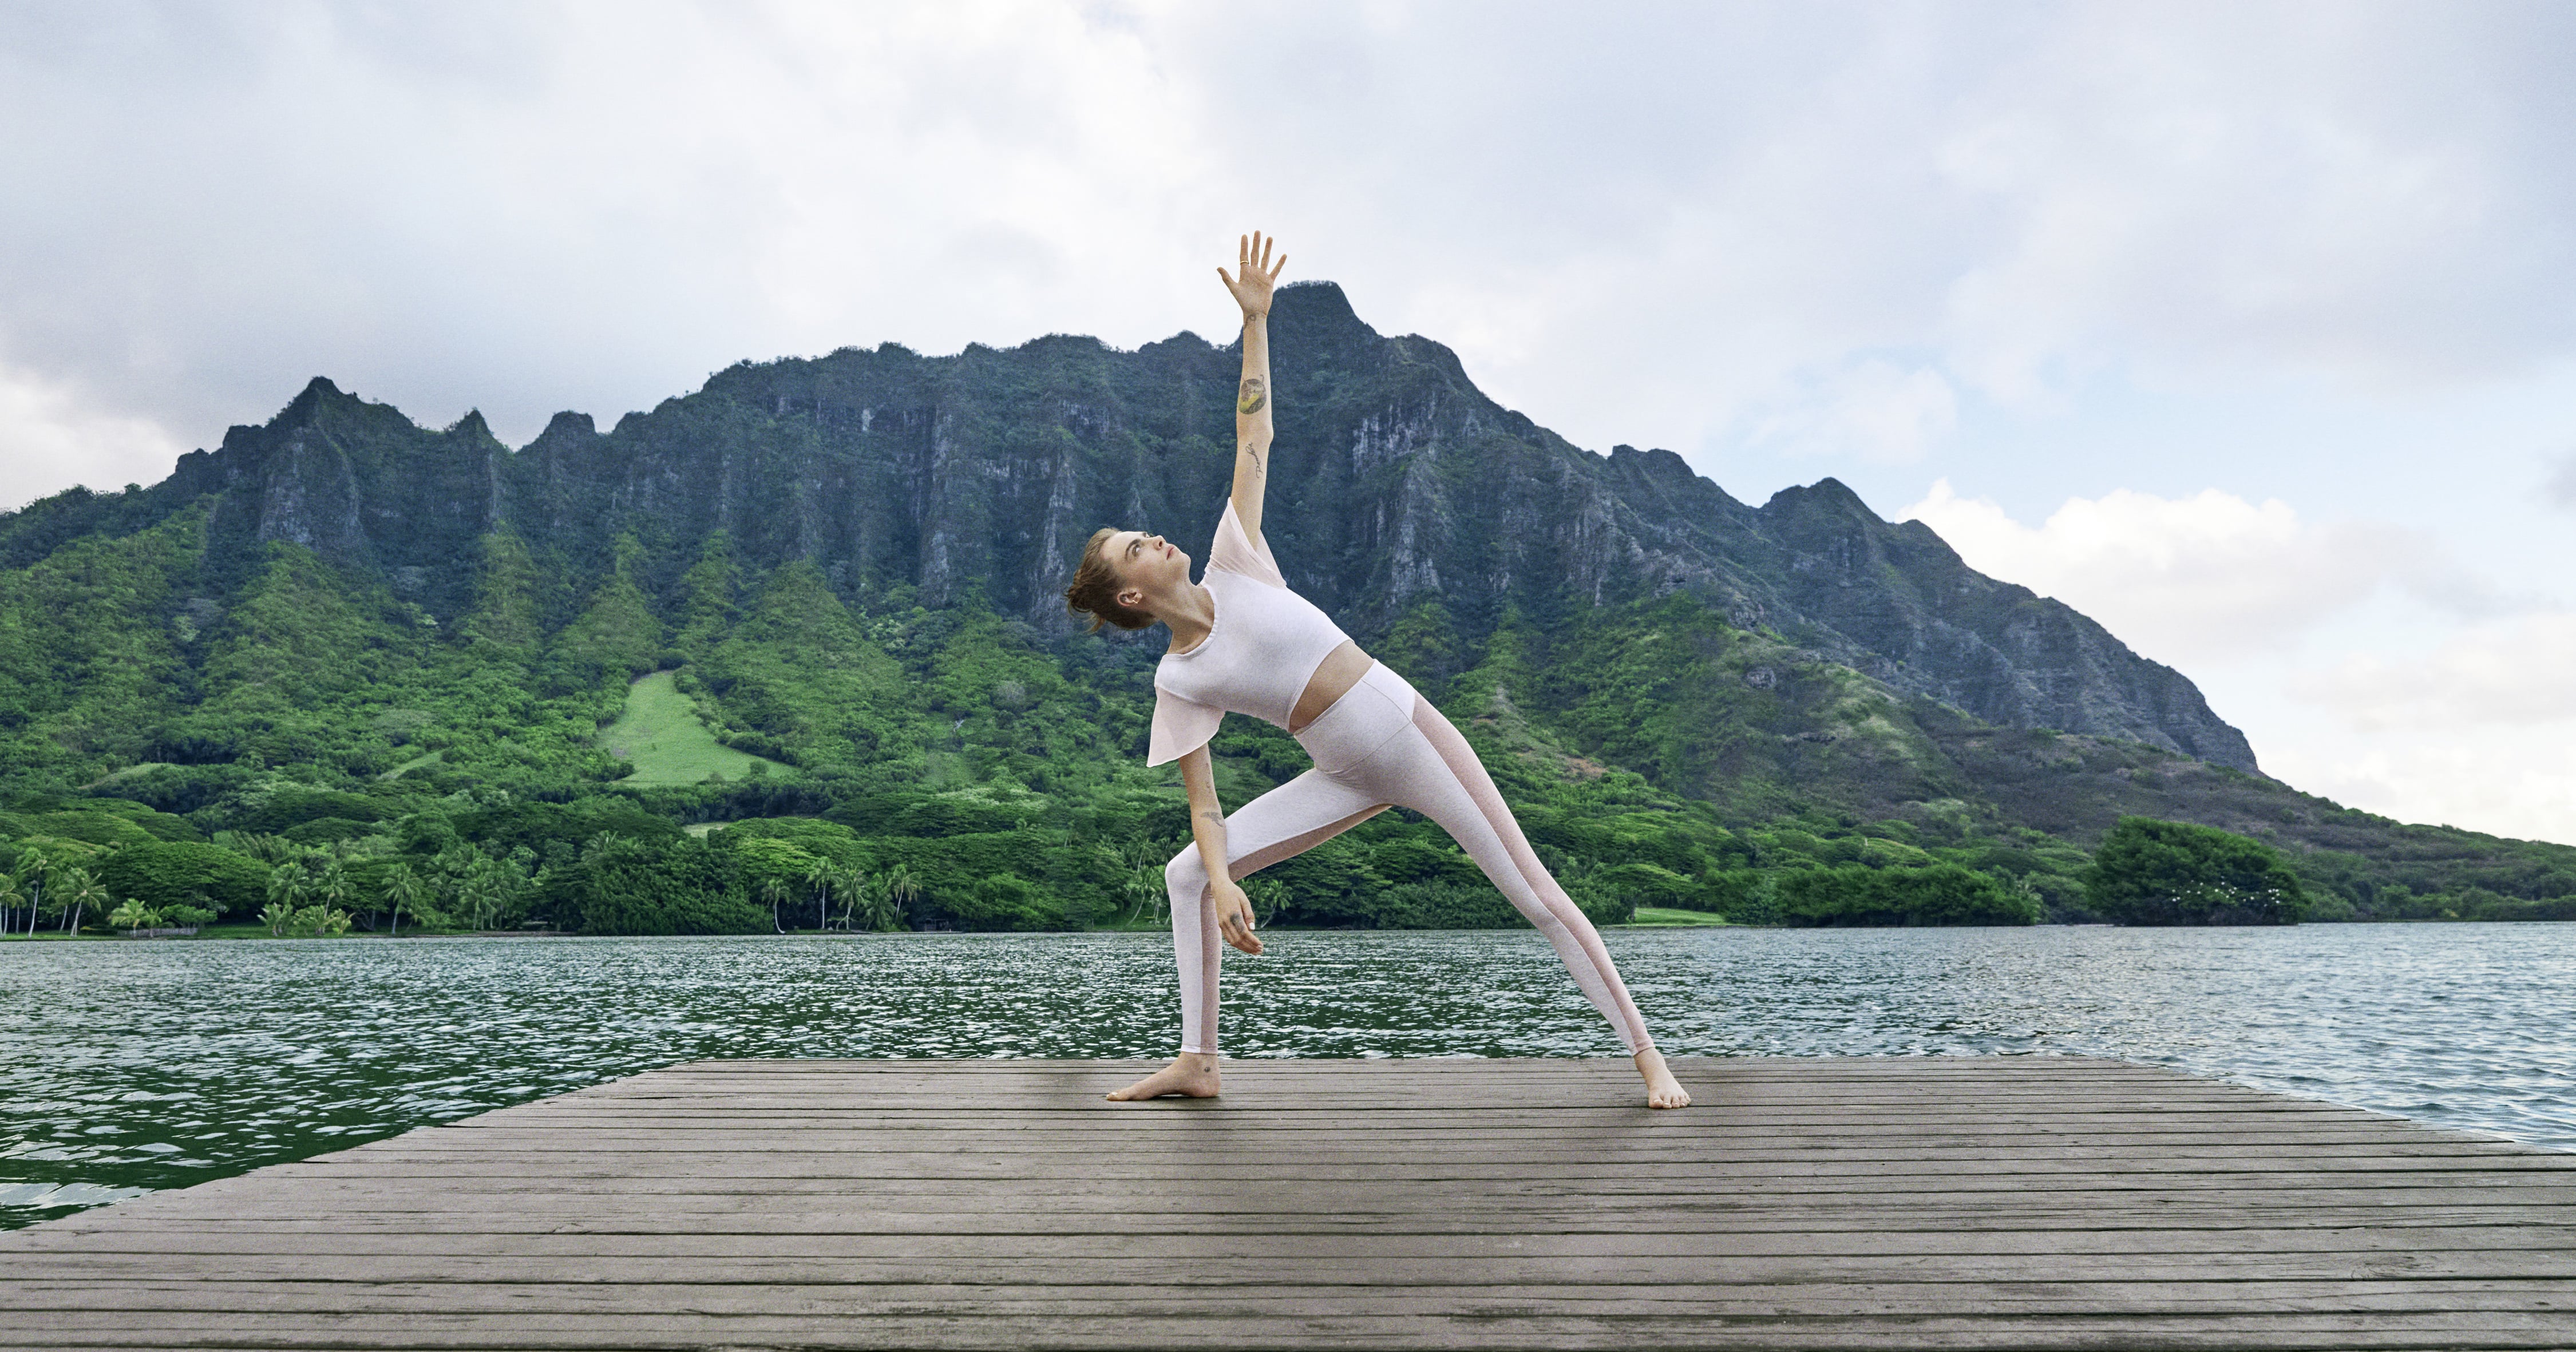 Puma and Cara Delevingne Launch a Yoga-Inspired Collection